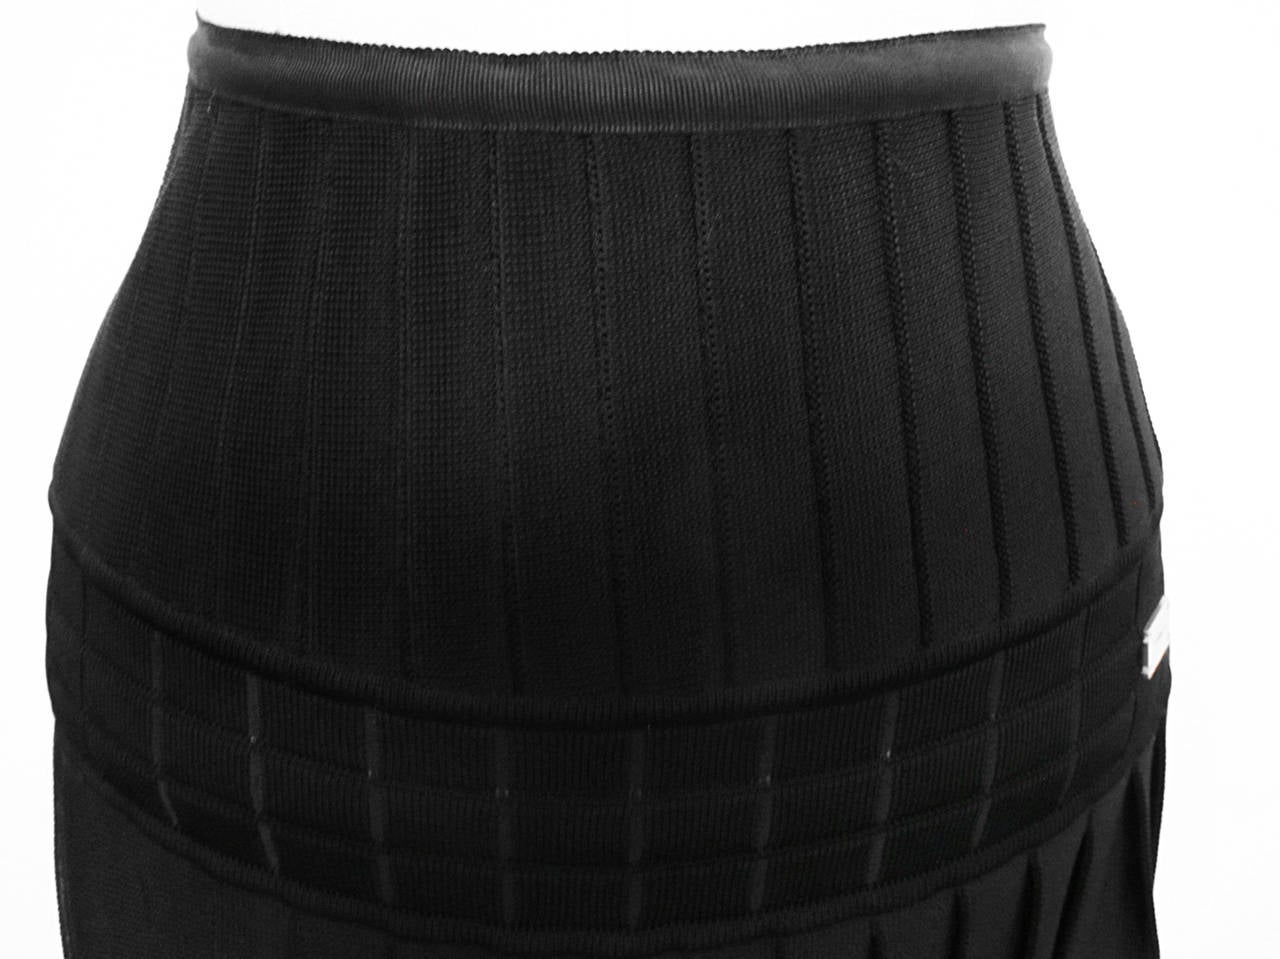 Chanel Black Knit Skirt with Chanel Logo For Sale 1